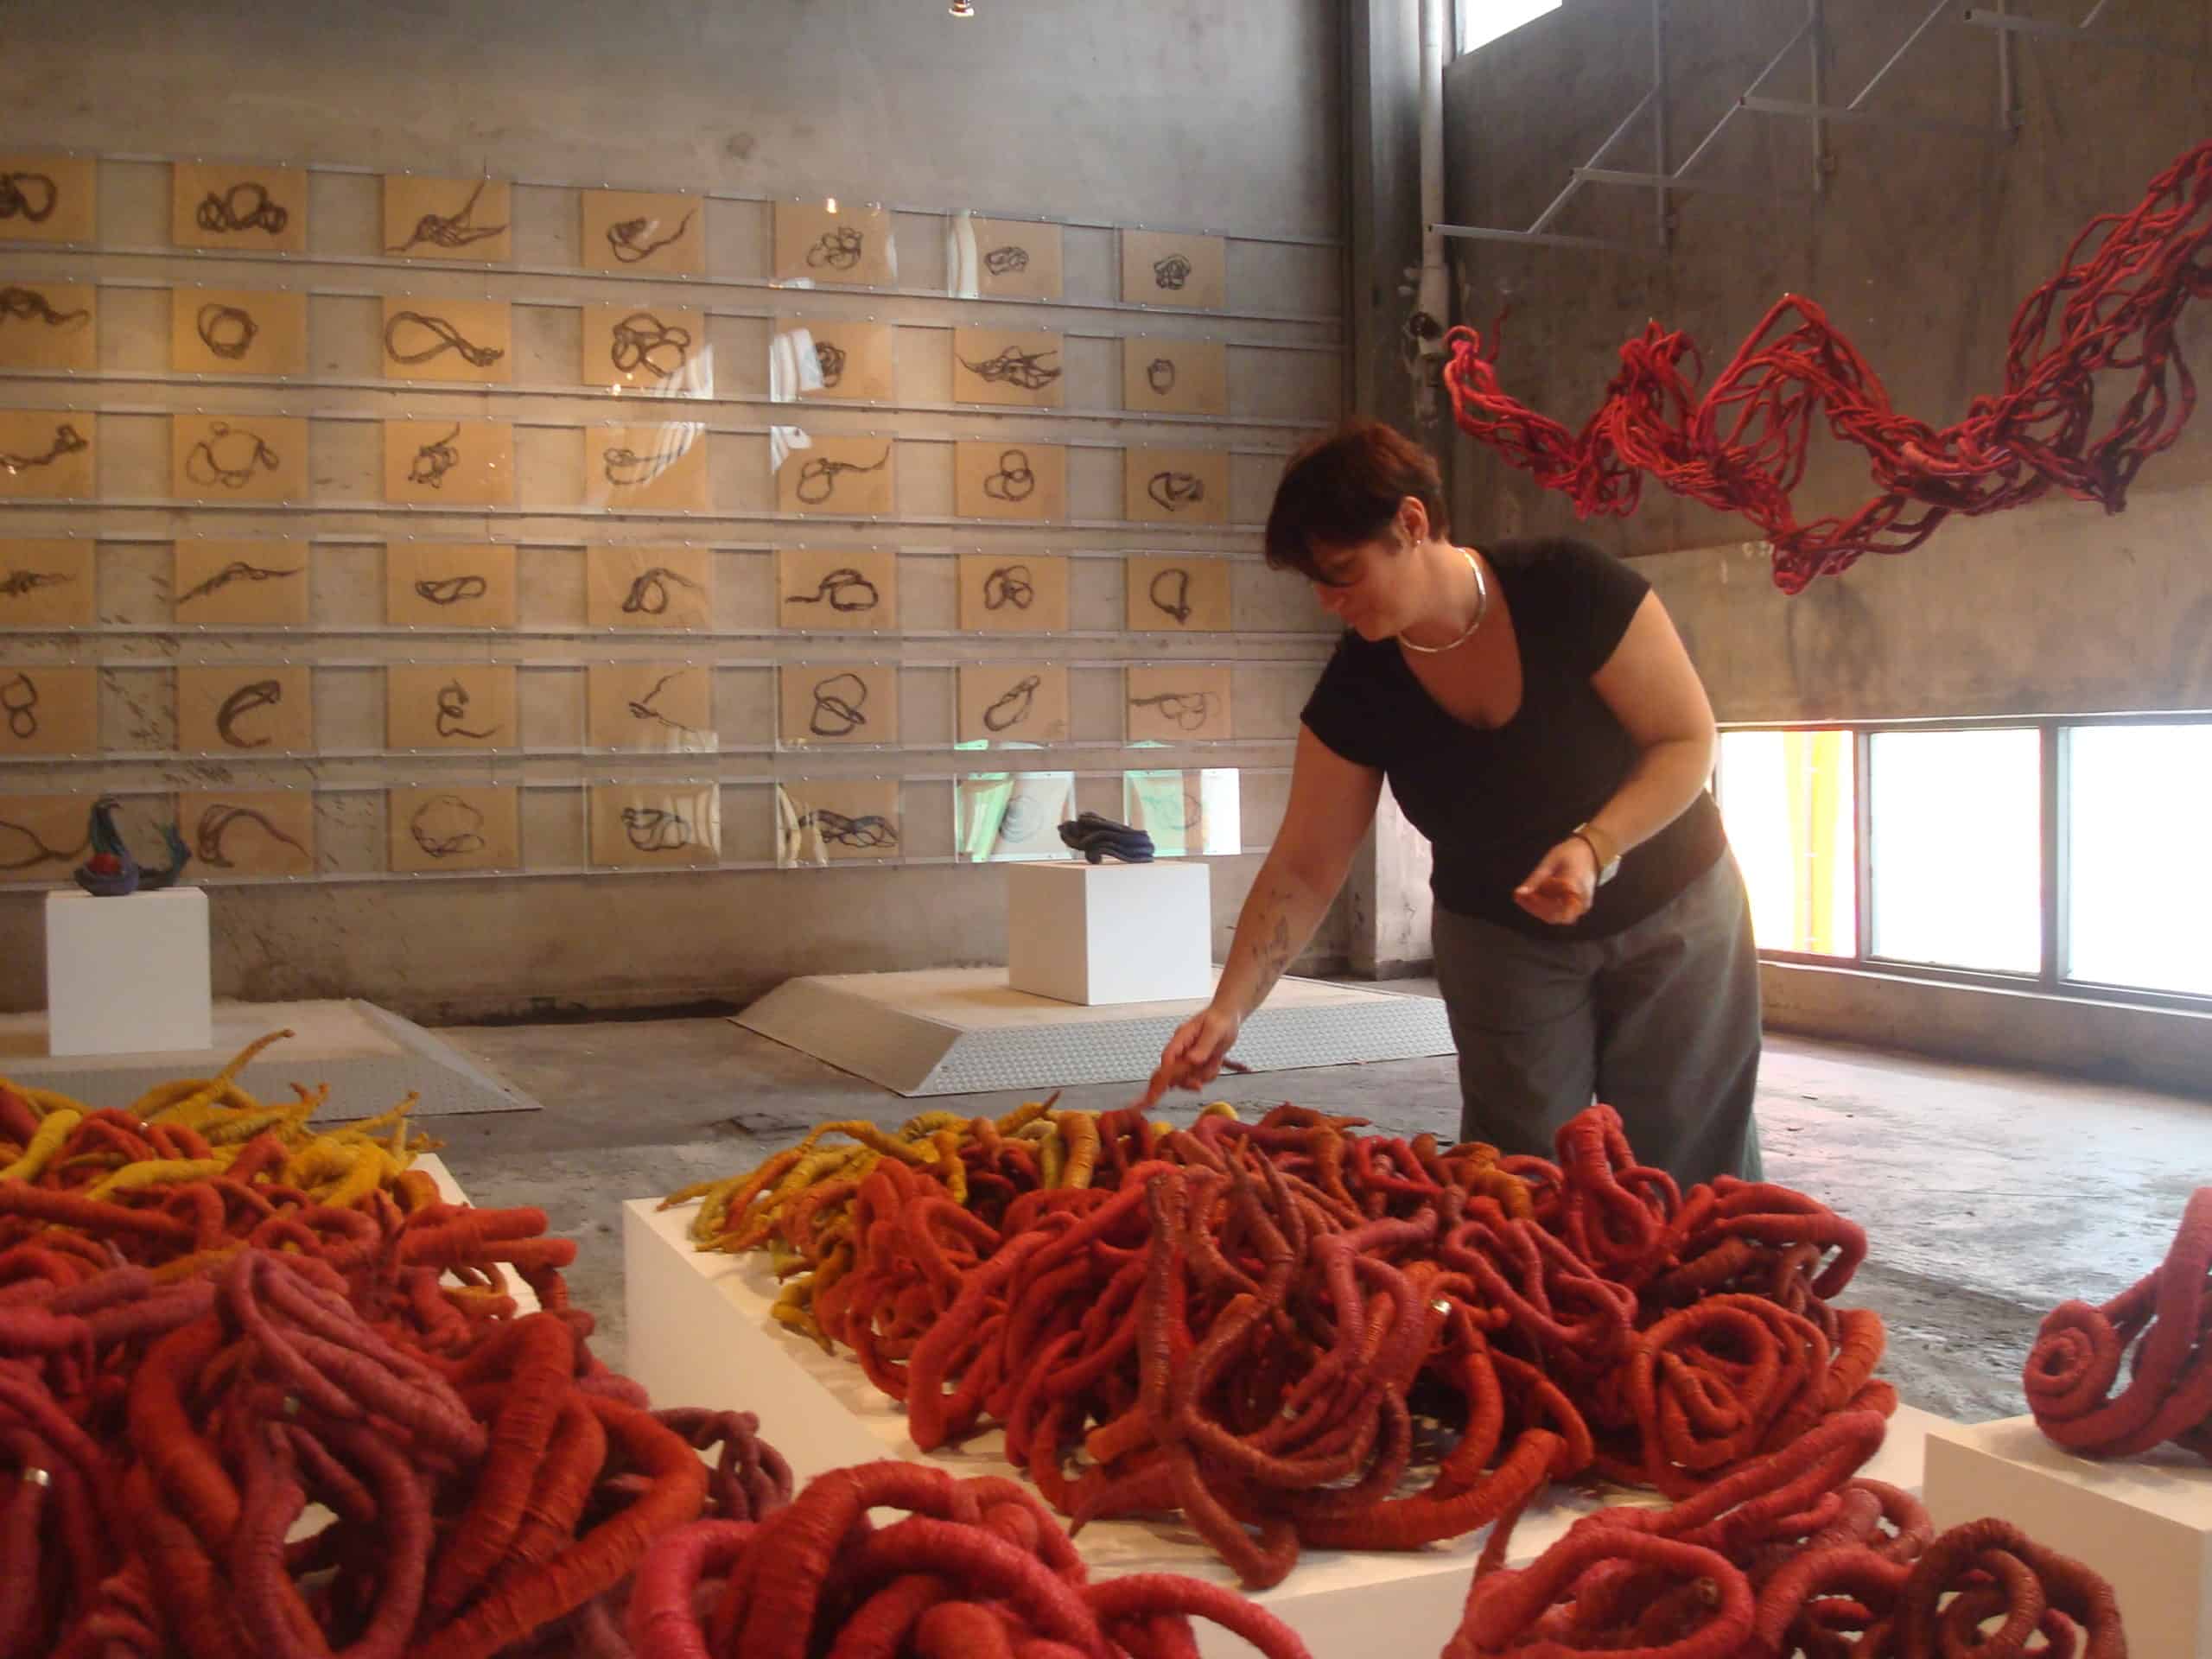 Sculptor Aude Franjou is preparing an exhibition of red sculptures and drawings